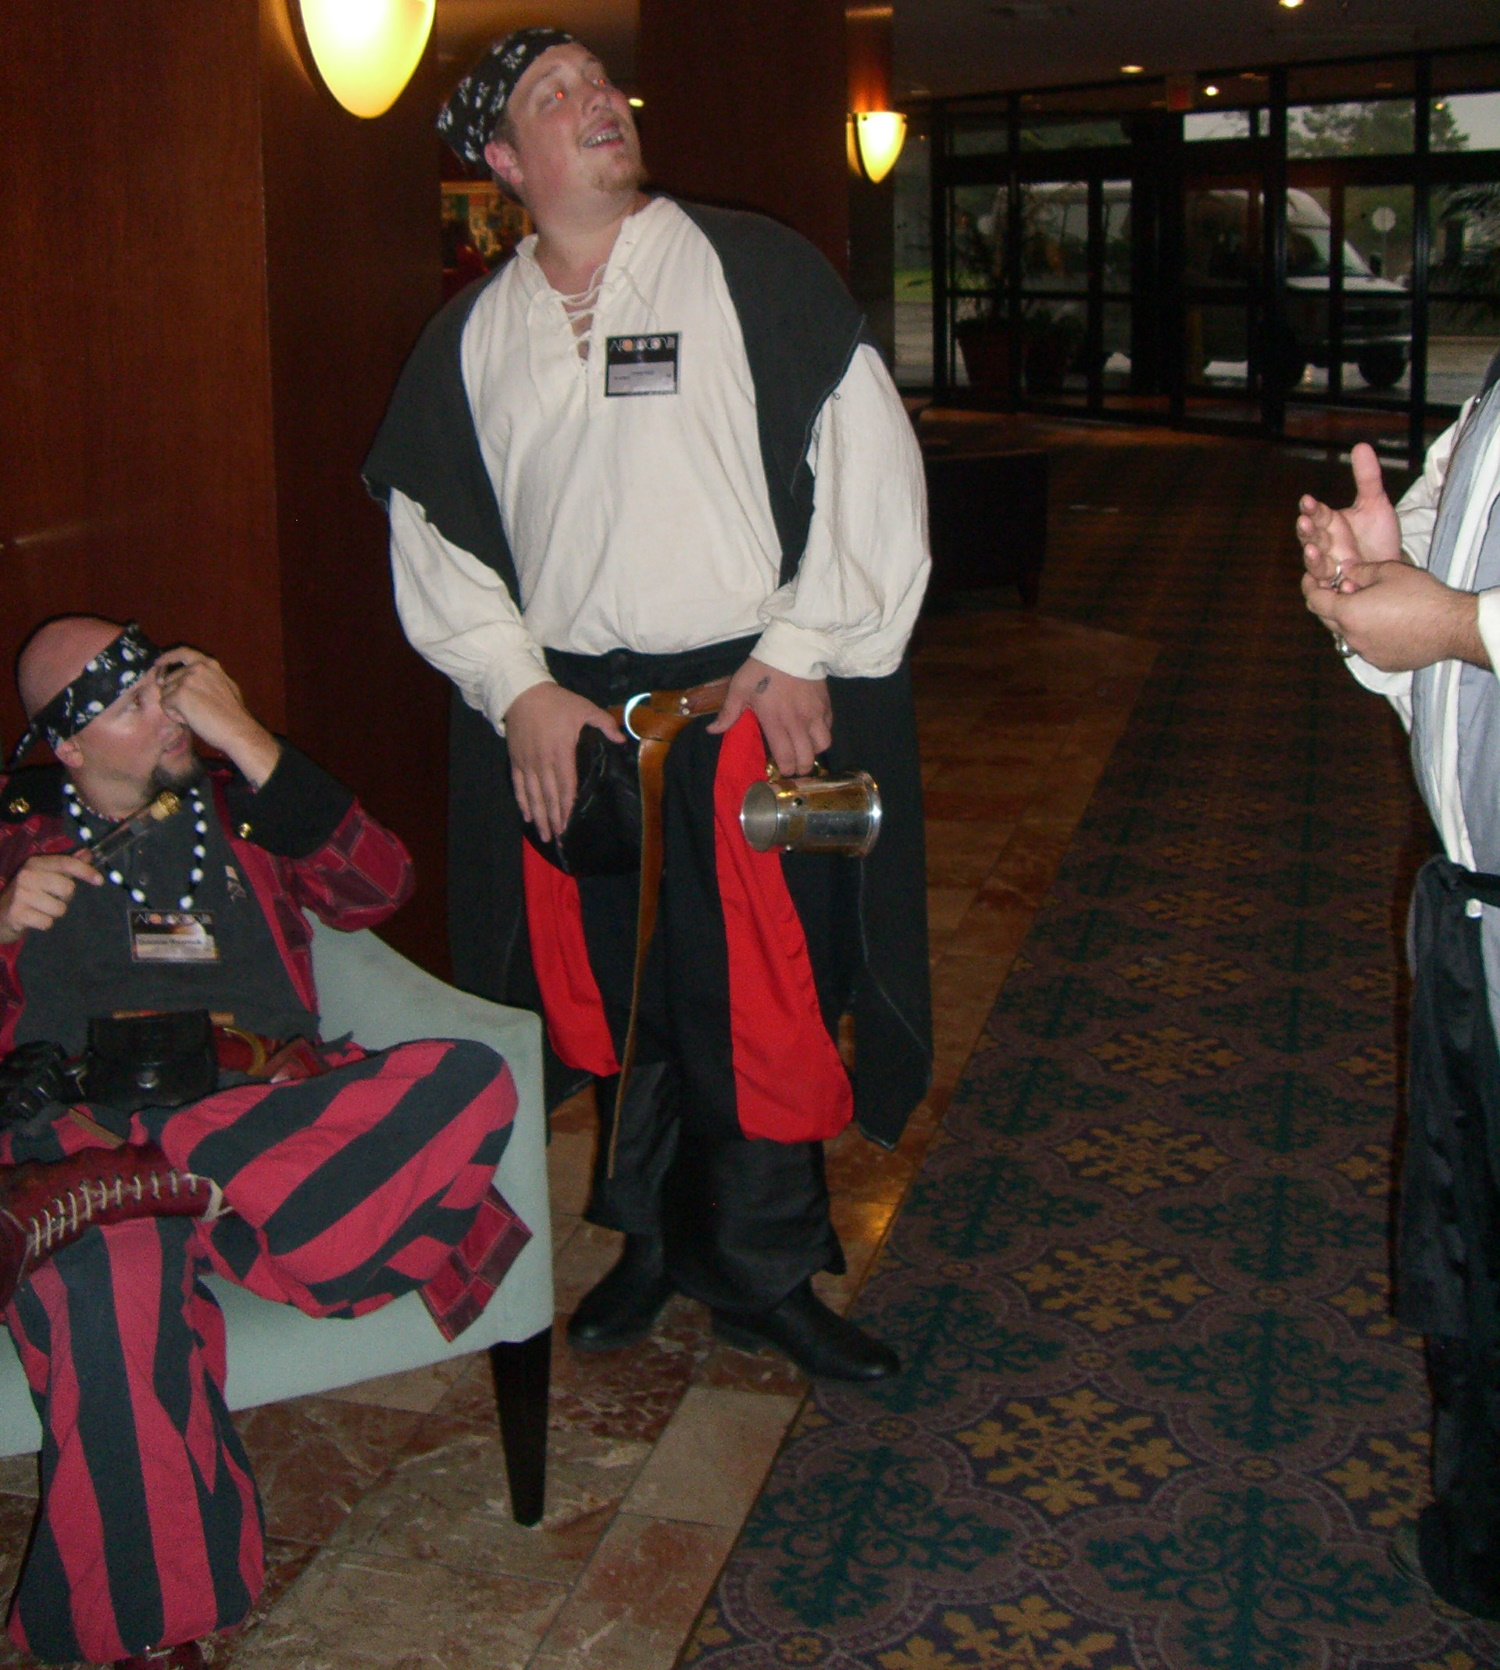 Congoers in red-and-black pirate-like costumes at ApolloCon 2007